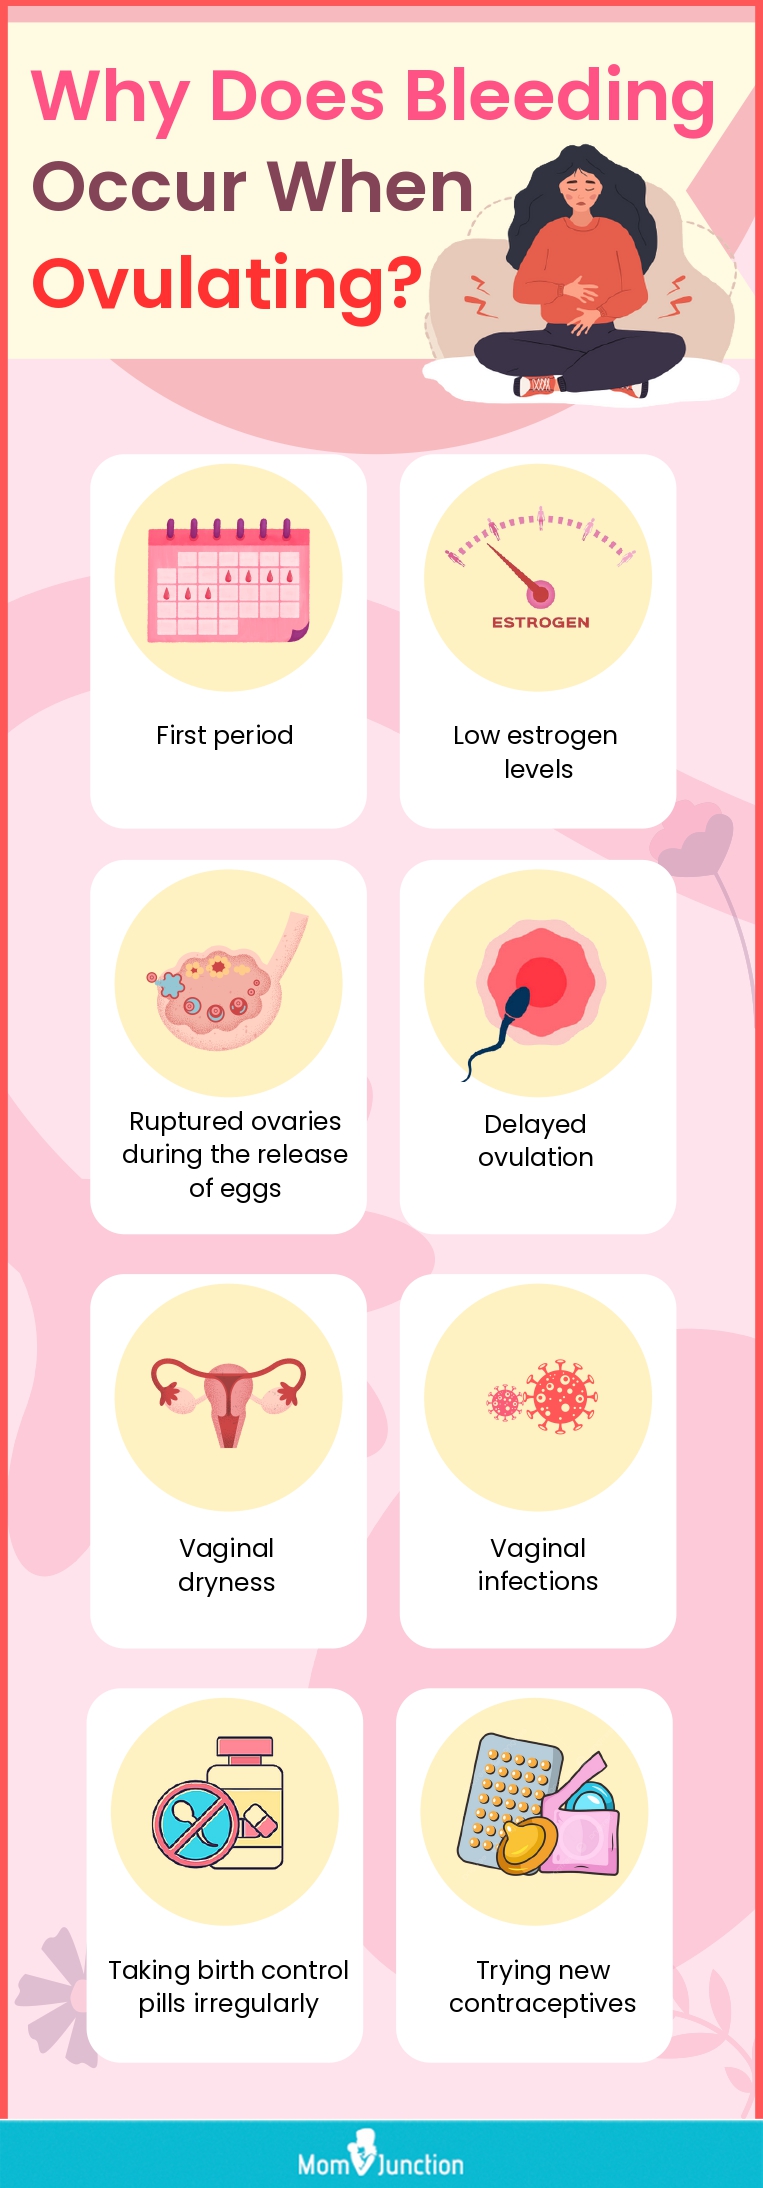 why does bleeding occur when ovulating (infographic)